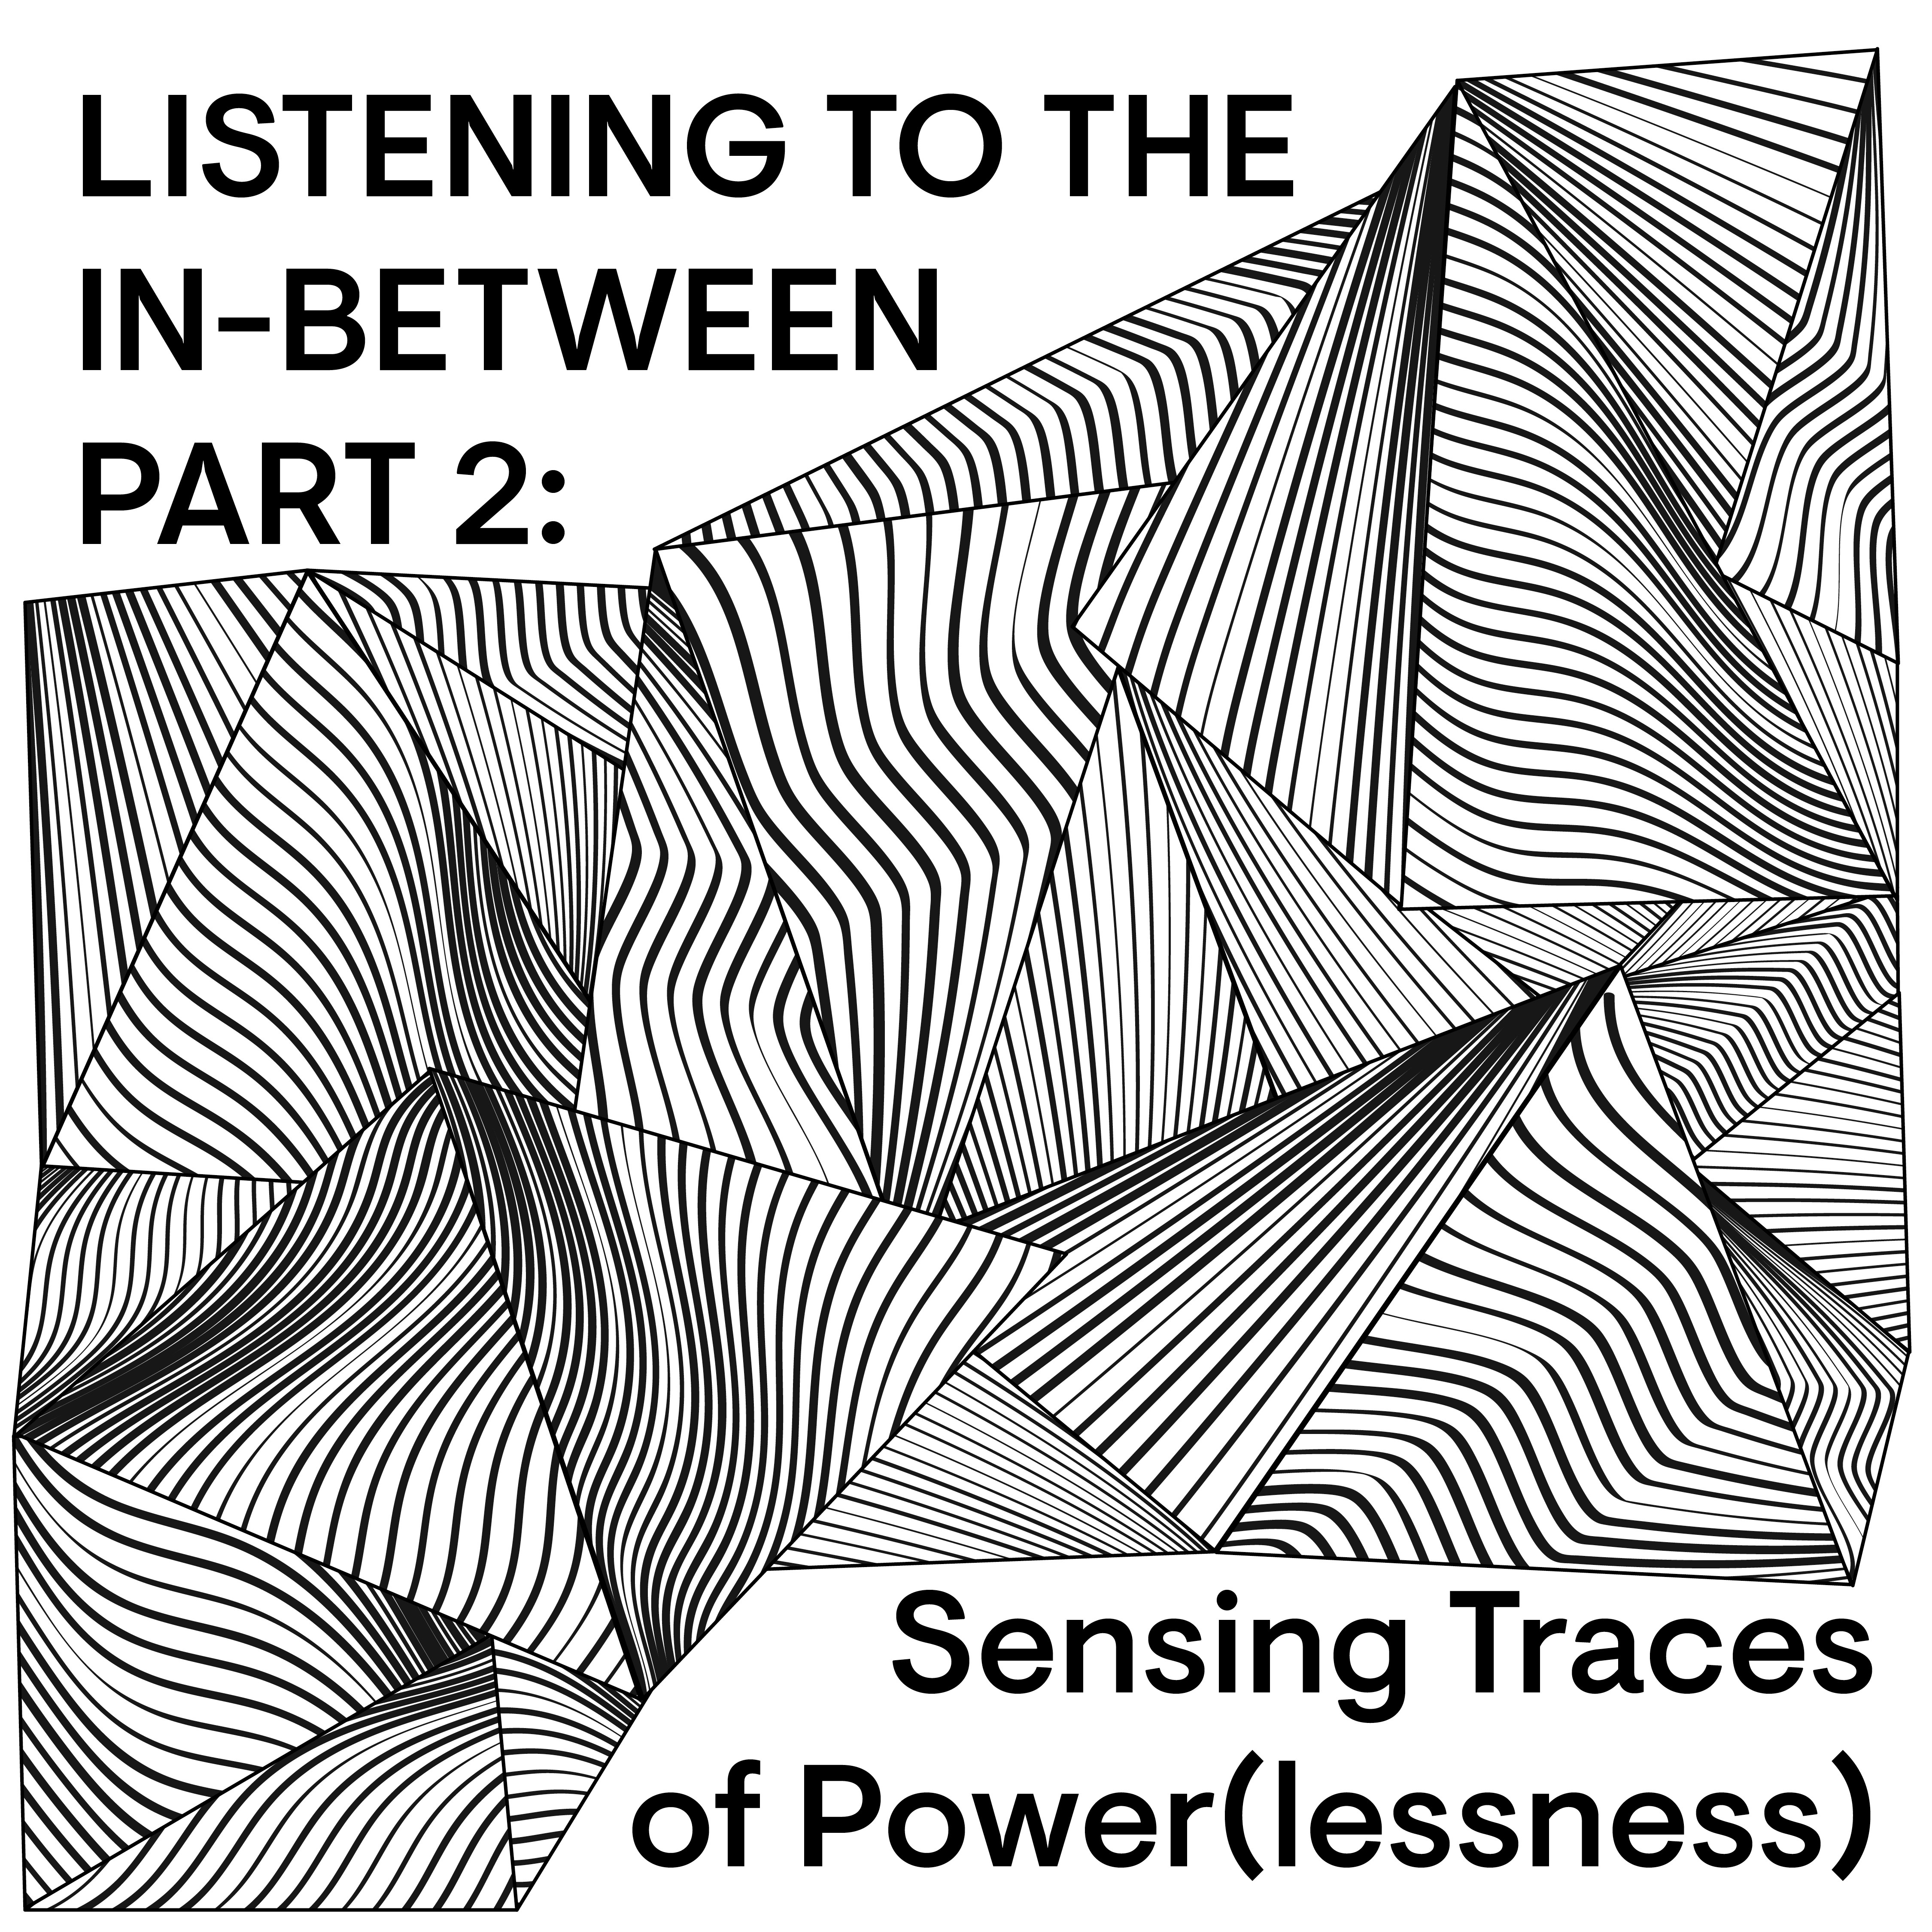 Listening to the In-Between Part 2: Sensing Traces of Power(lessness)